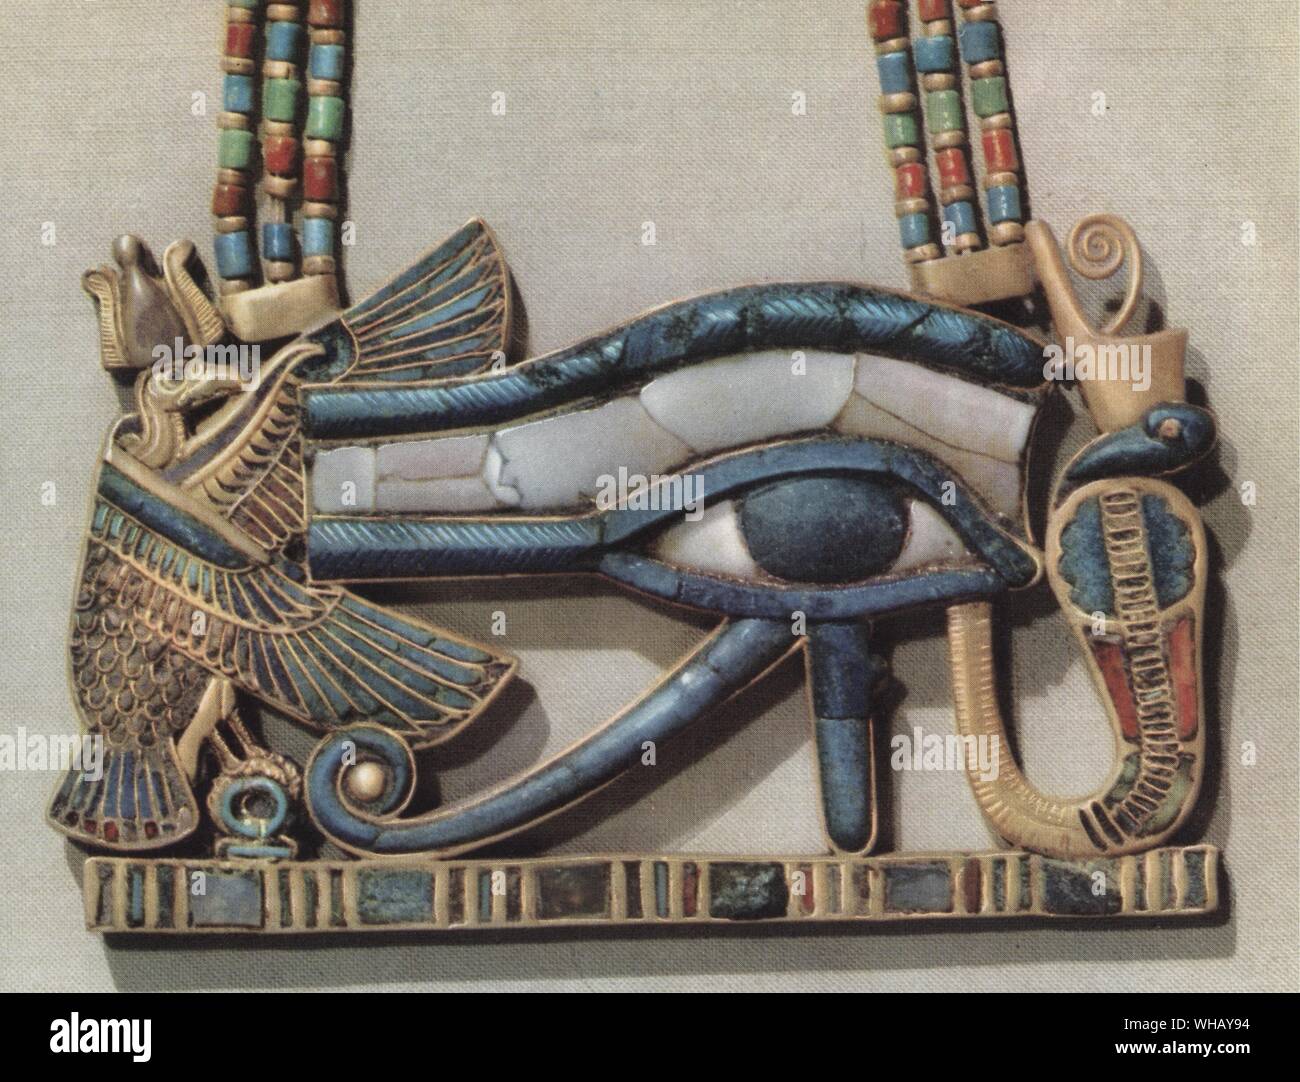 The king's pectoral decorated with the sacred eye flanked by the serpent goddess of the North and the vulture goddess of the South. Gold cloisonné with glass paste. Tukankhamen, by Christiane Desroches Noblecourt, page 187.. The vulture was the symbol of Upper Egypt. Pharaohs wore the uraeus (cobra) and the head of a vulture on their foreheads as symbols of royal protection. The goddess Nekhbet was also portrayed as a vulture. Stock Photo